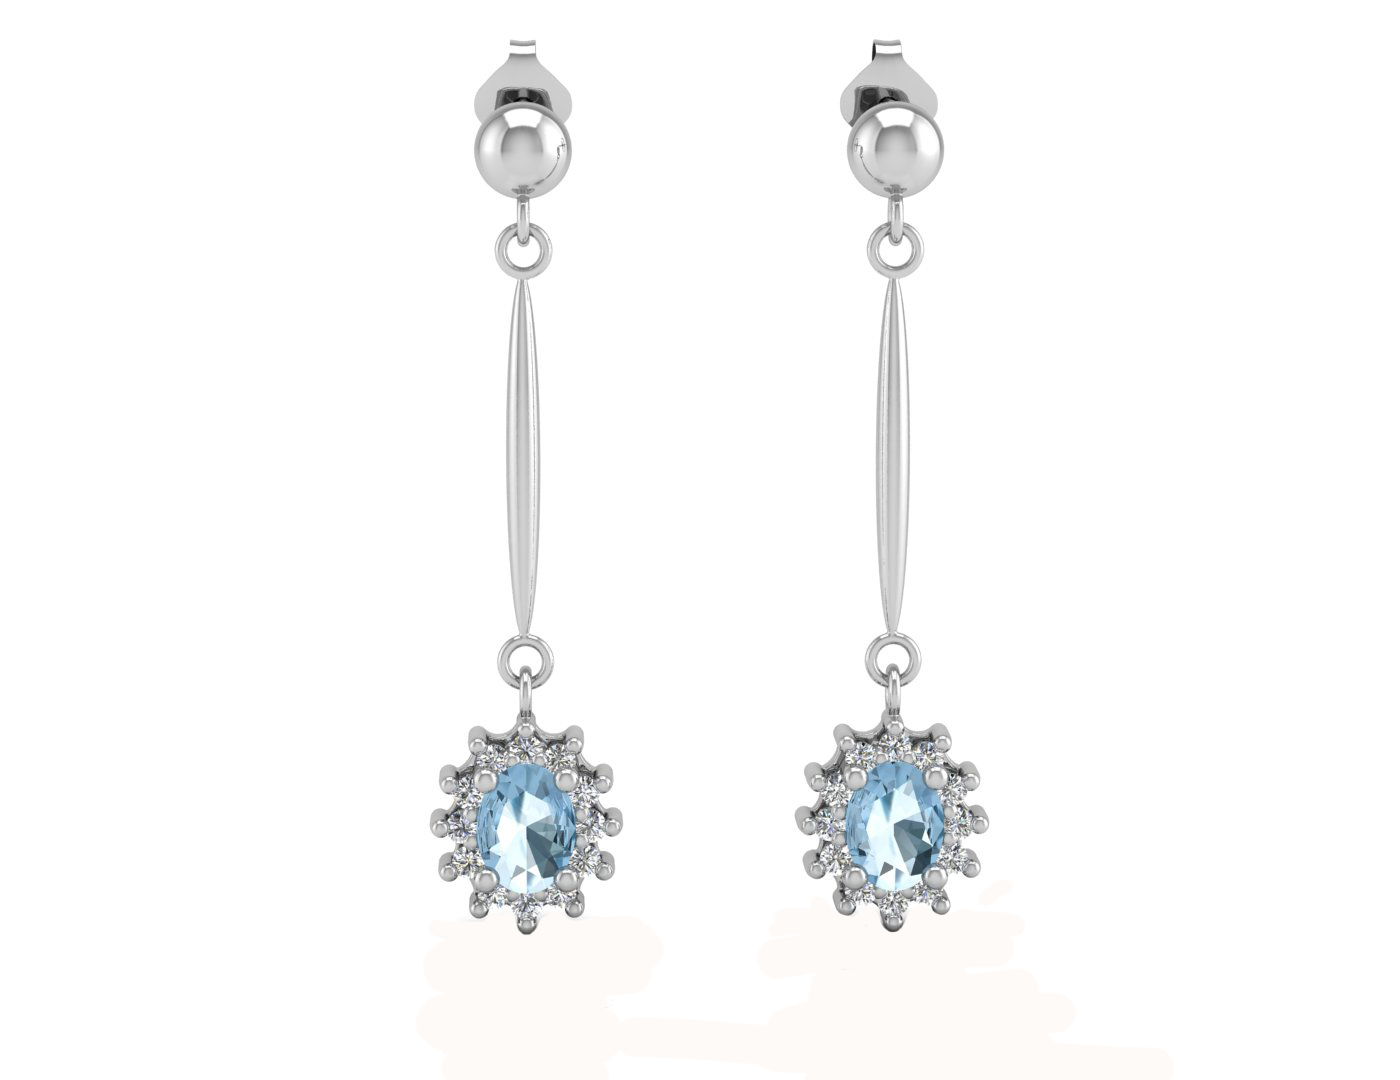 9ct White Gold Diamond And Blue Topaz Earring 0.12 Carats - Image 3 of 3